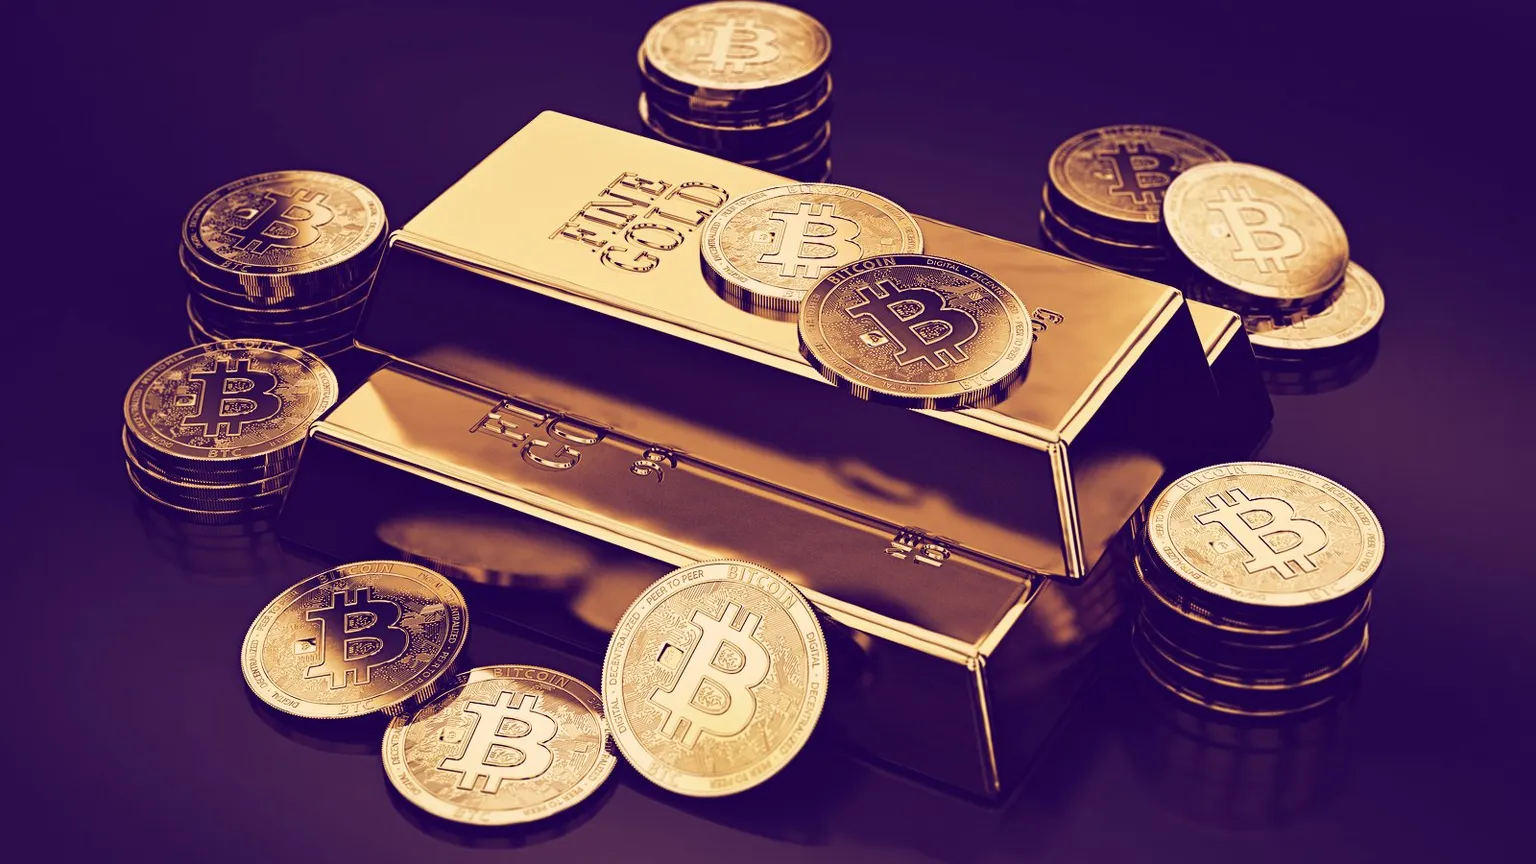 Gold breaks records while Bitcoin stagnates. Image: Shutterstock